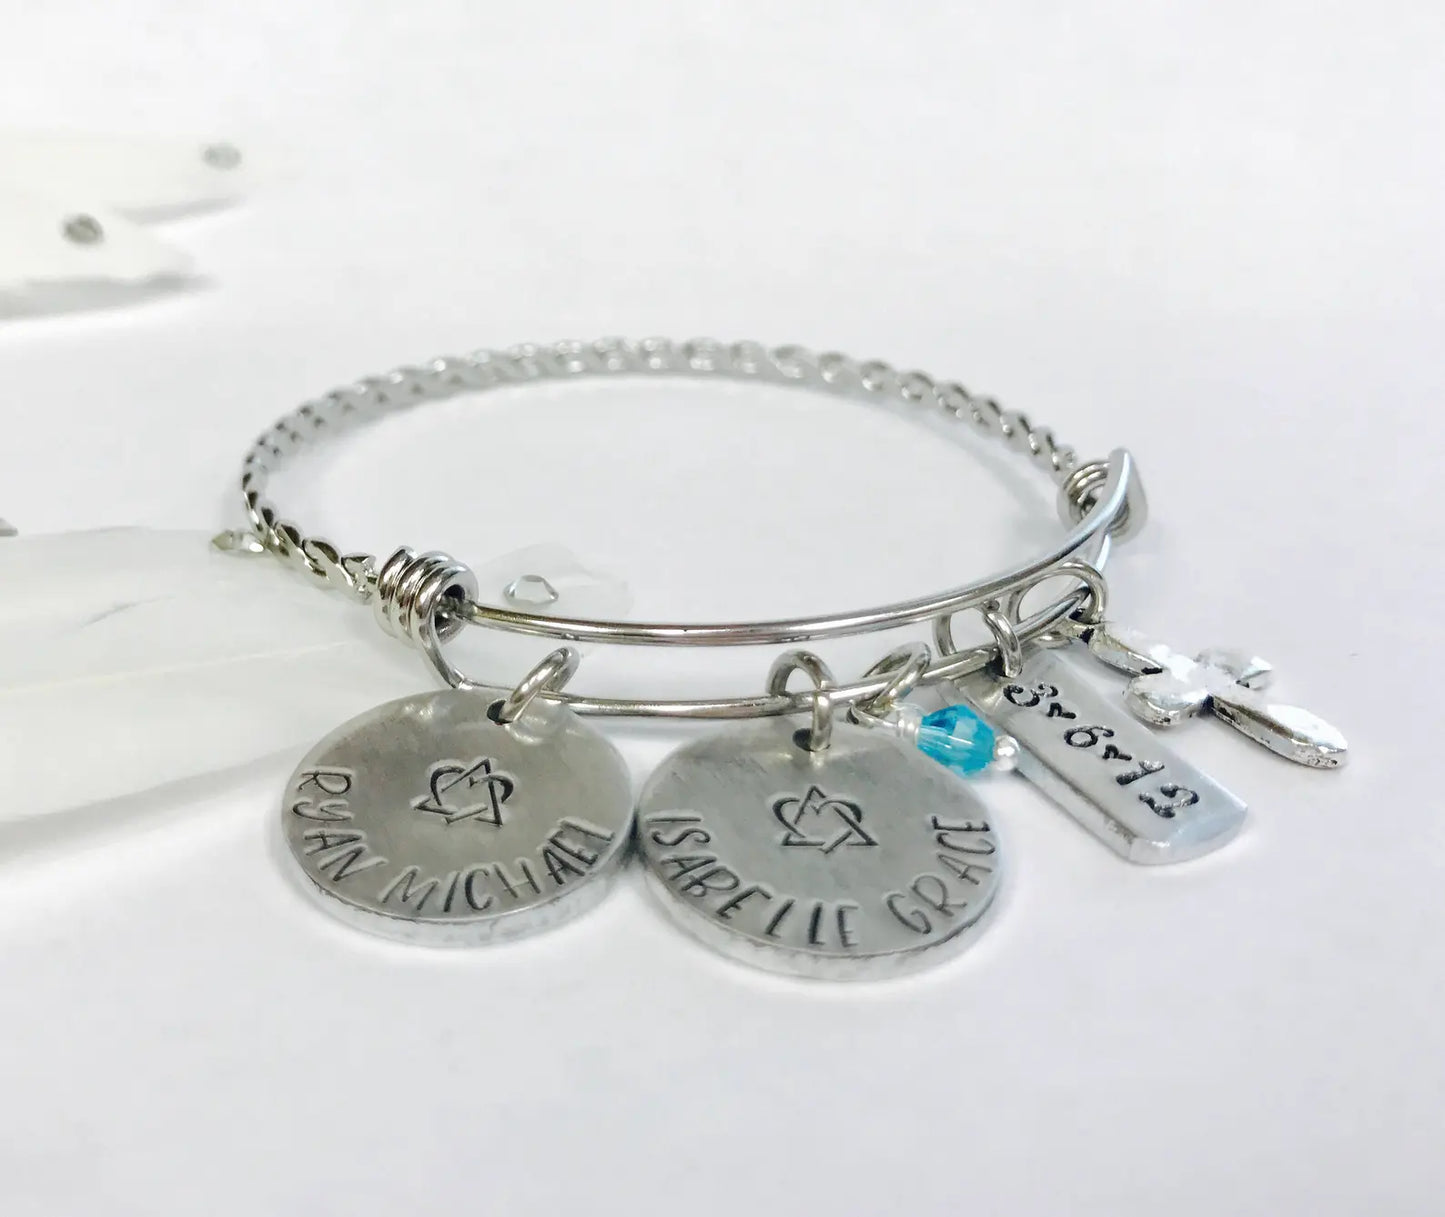 Gotcha day • adoption gift • forever family • foster to adopt • gotcha day gift • adoption gift • gotcha day jewelry •